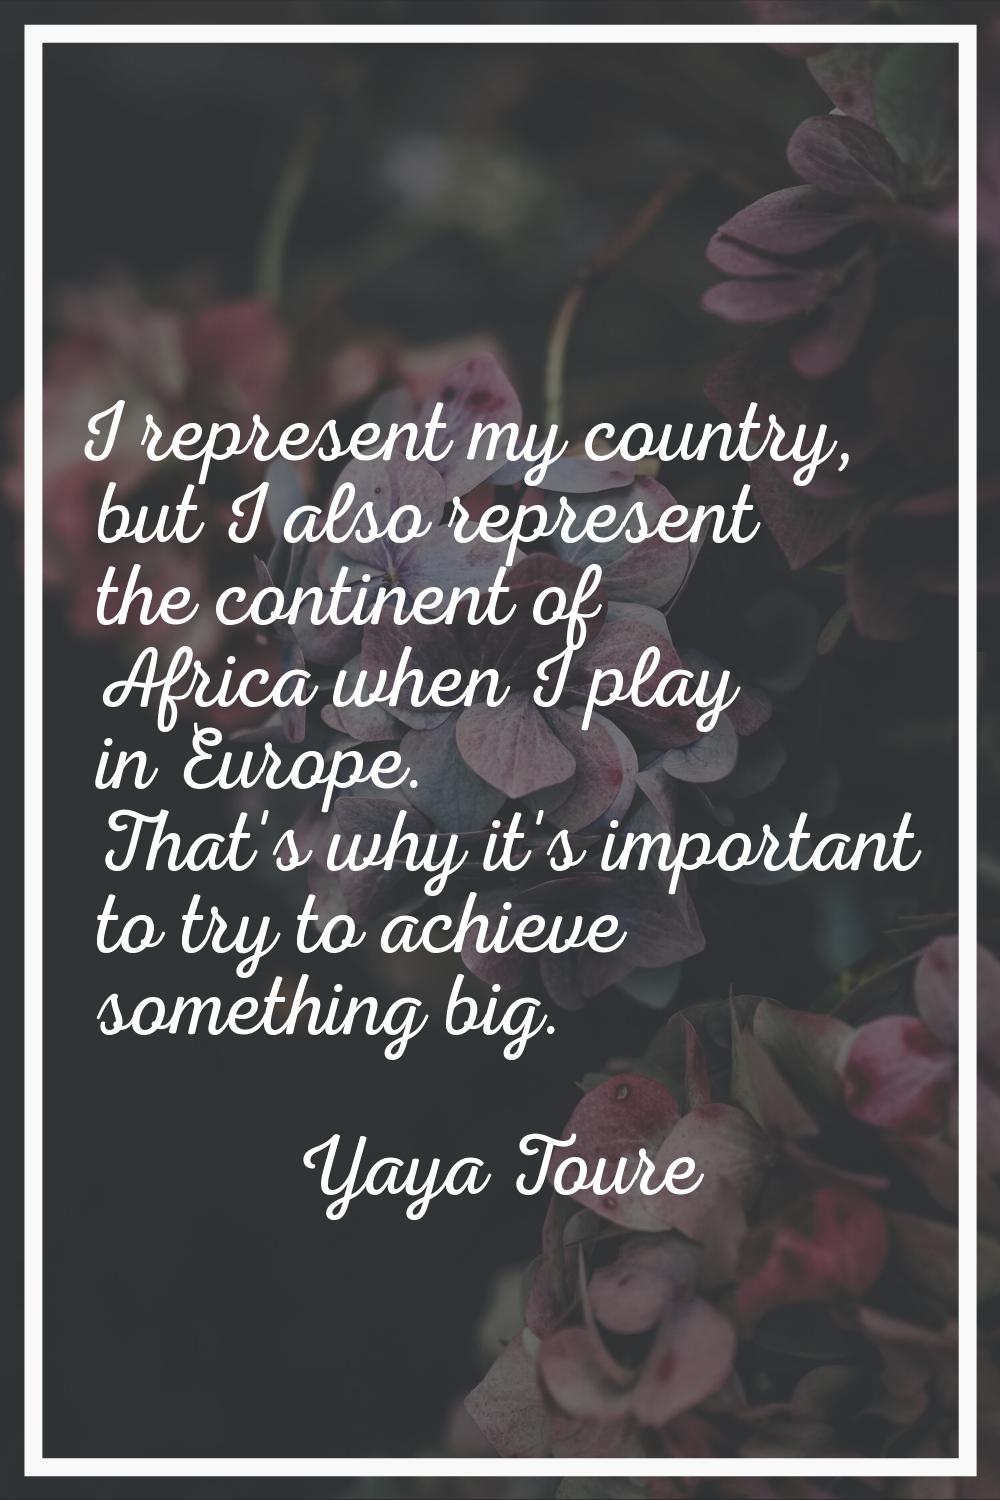 I represent my country, but I also represent the continent of Africa when I play in Europe. That's 